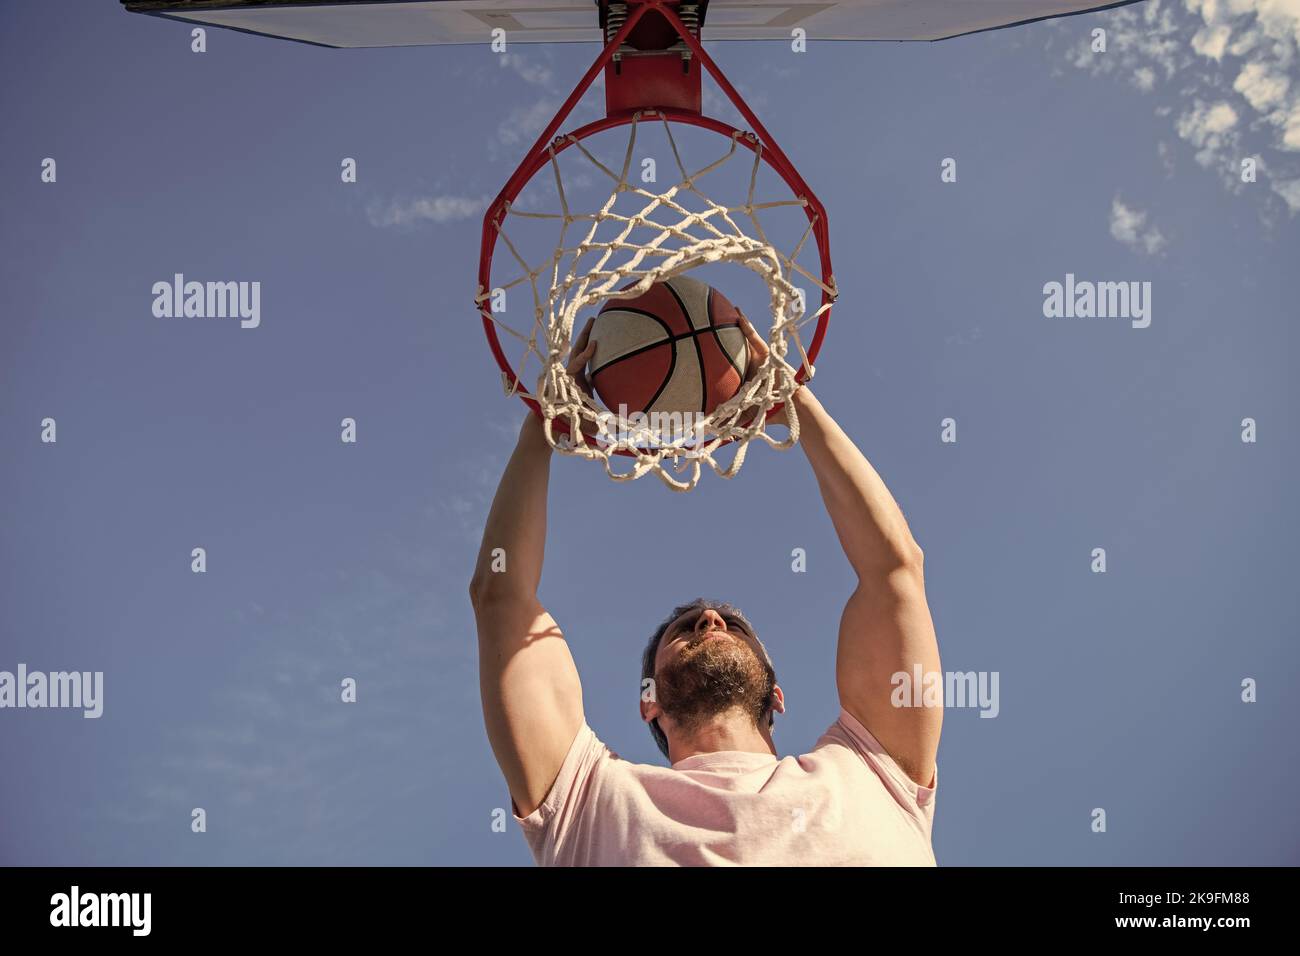 player dunking basketball ball through net ring with hands, sport motivation Stock Photo